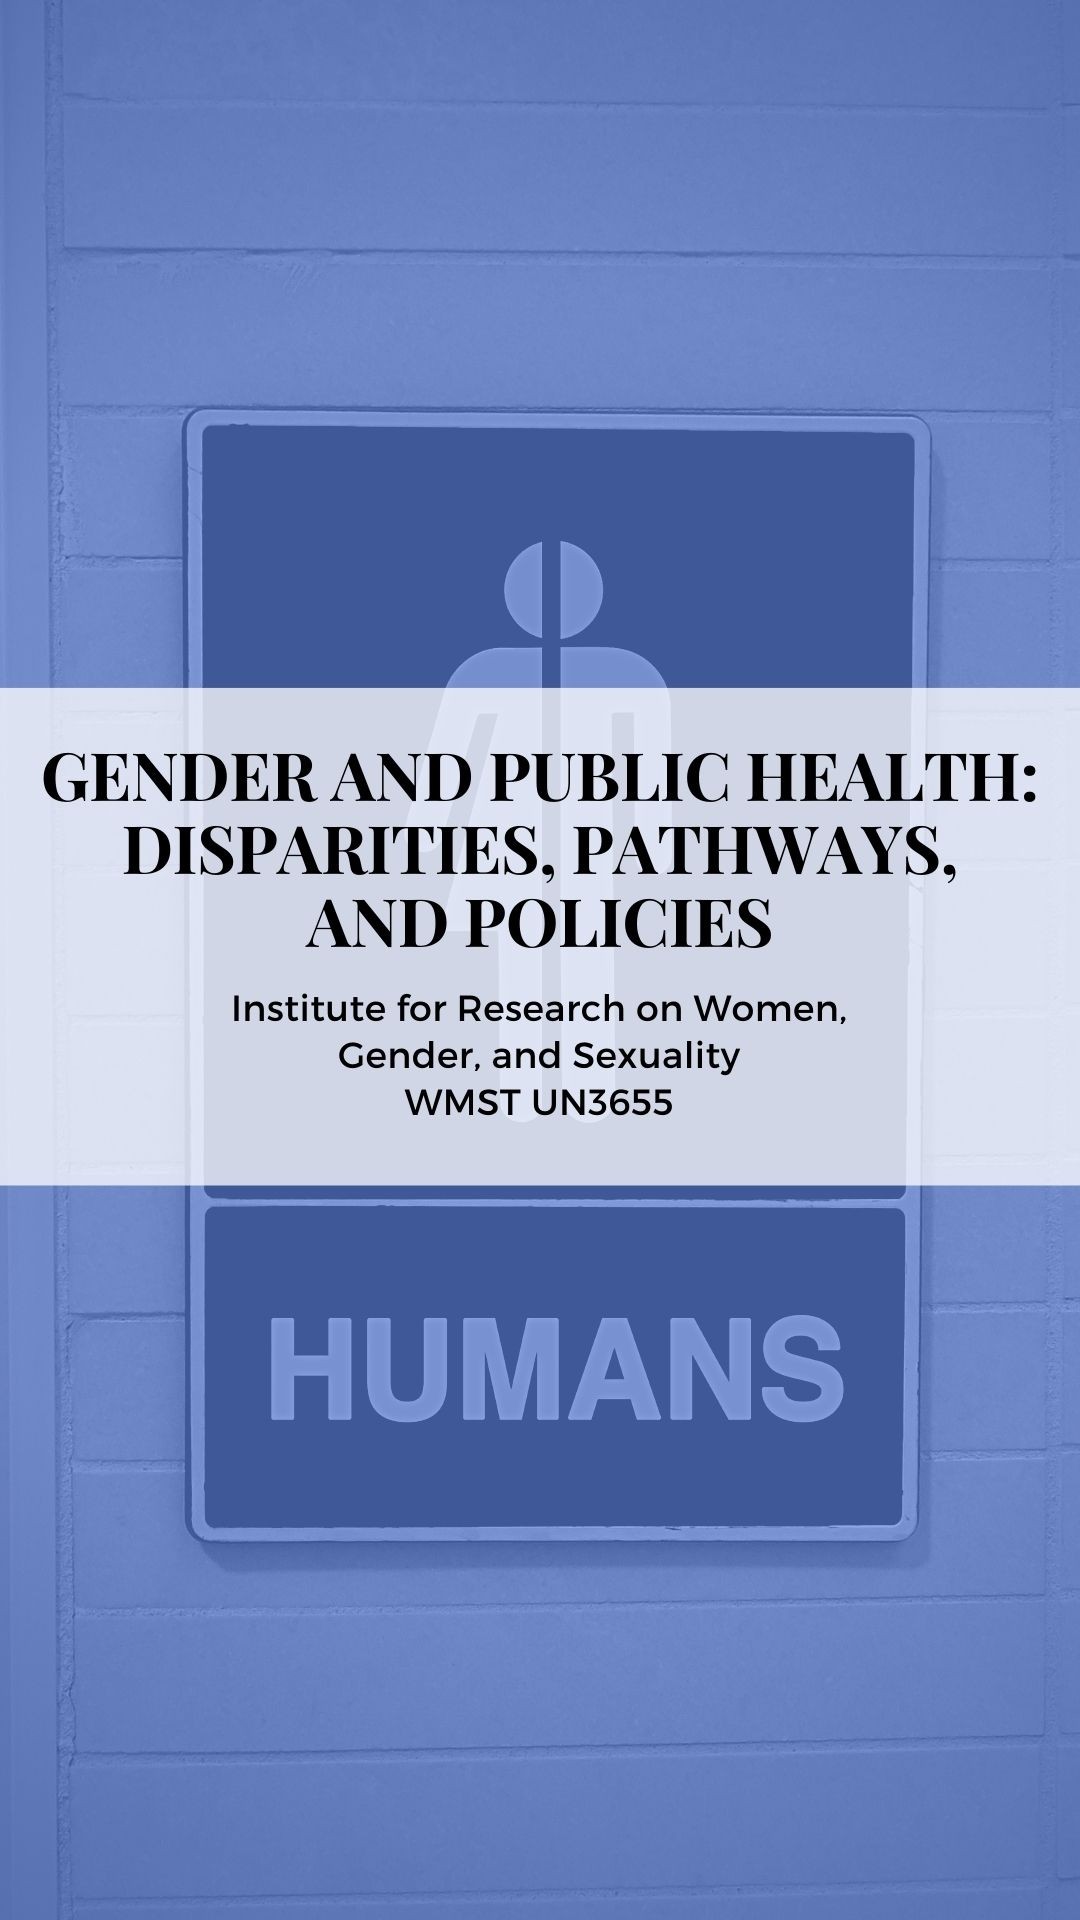 Spring 2021 course Gender and Public Health: Disparities, Pathways, and Policies; course number WMST UN3655	